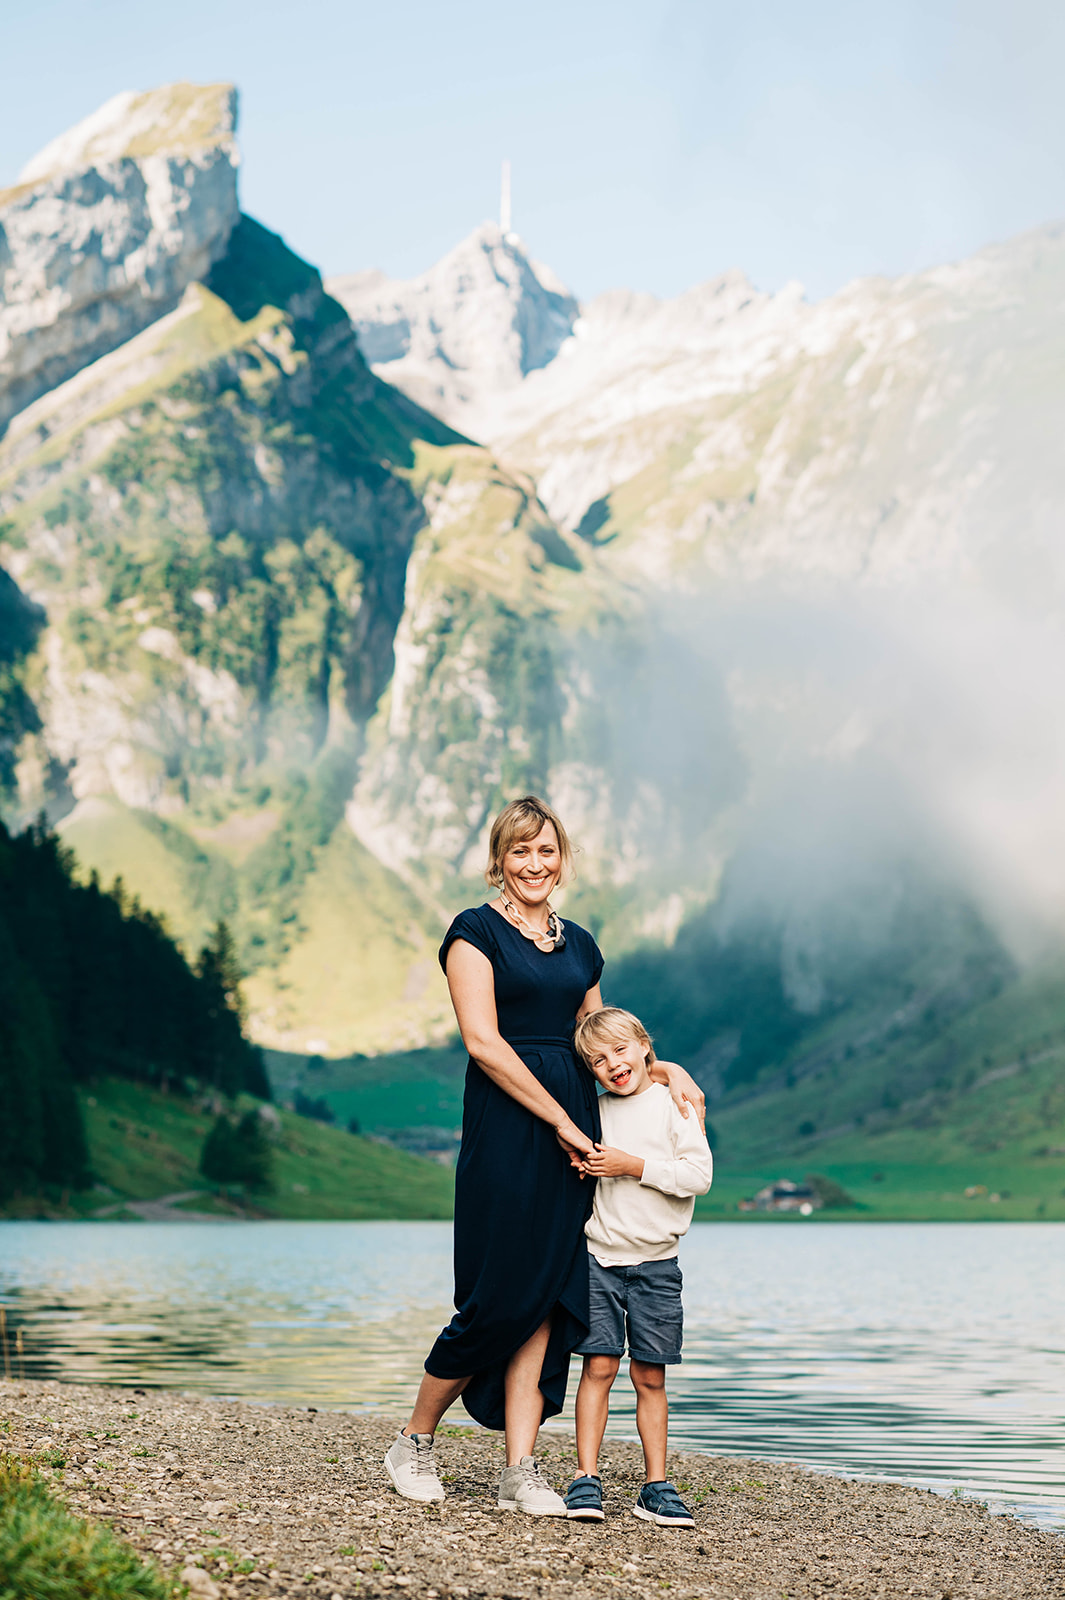 Säntis is the perfect backdrop to your family photos at Seealpsee